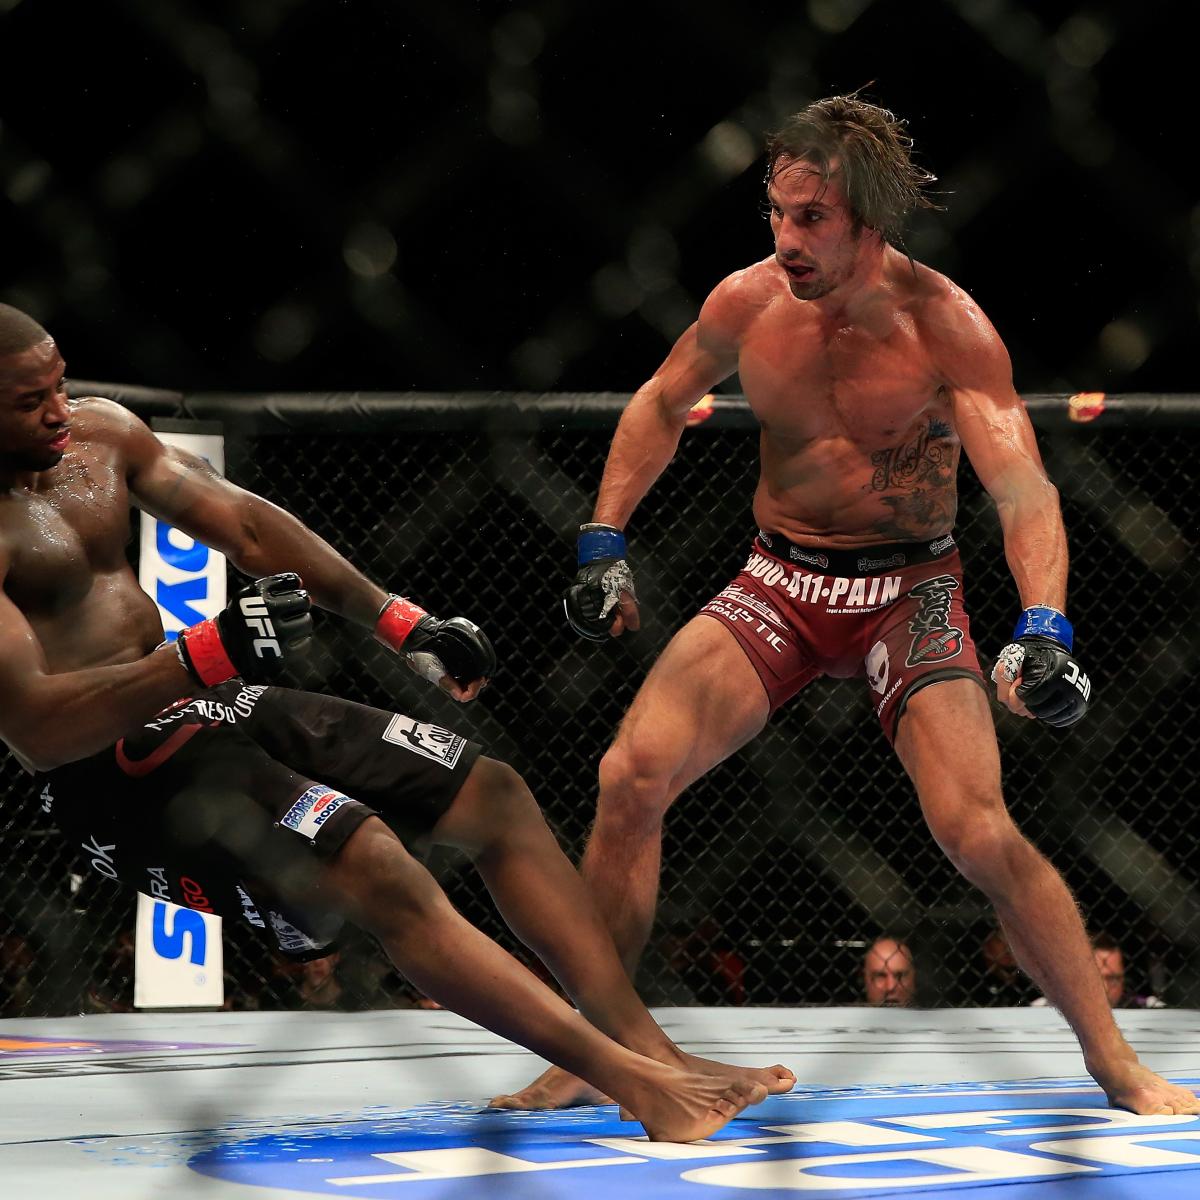 Meet the 15 Best MMA Fighters of All Time